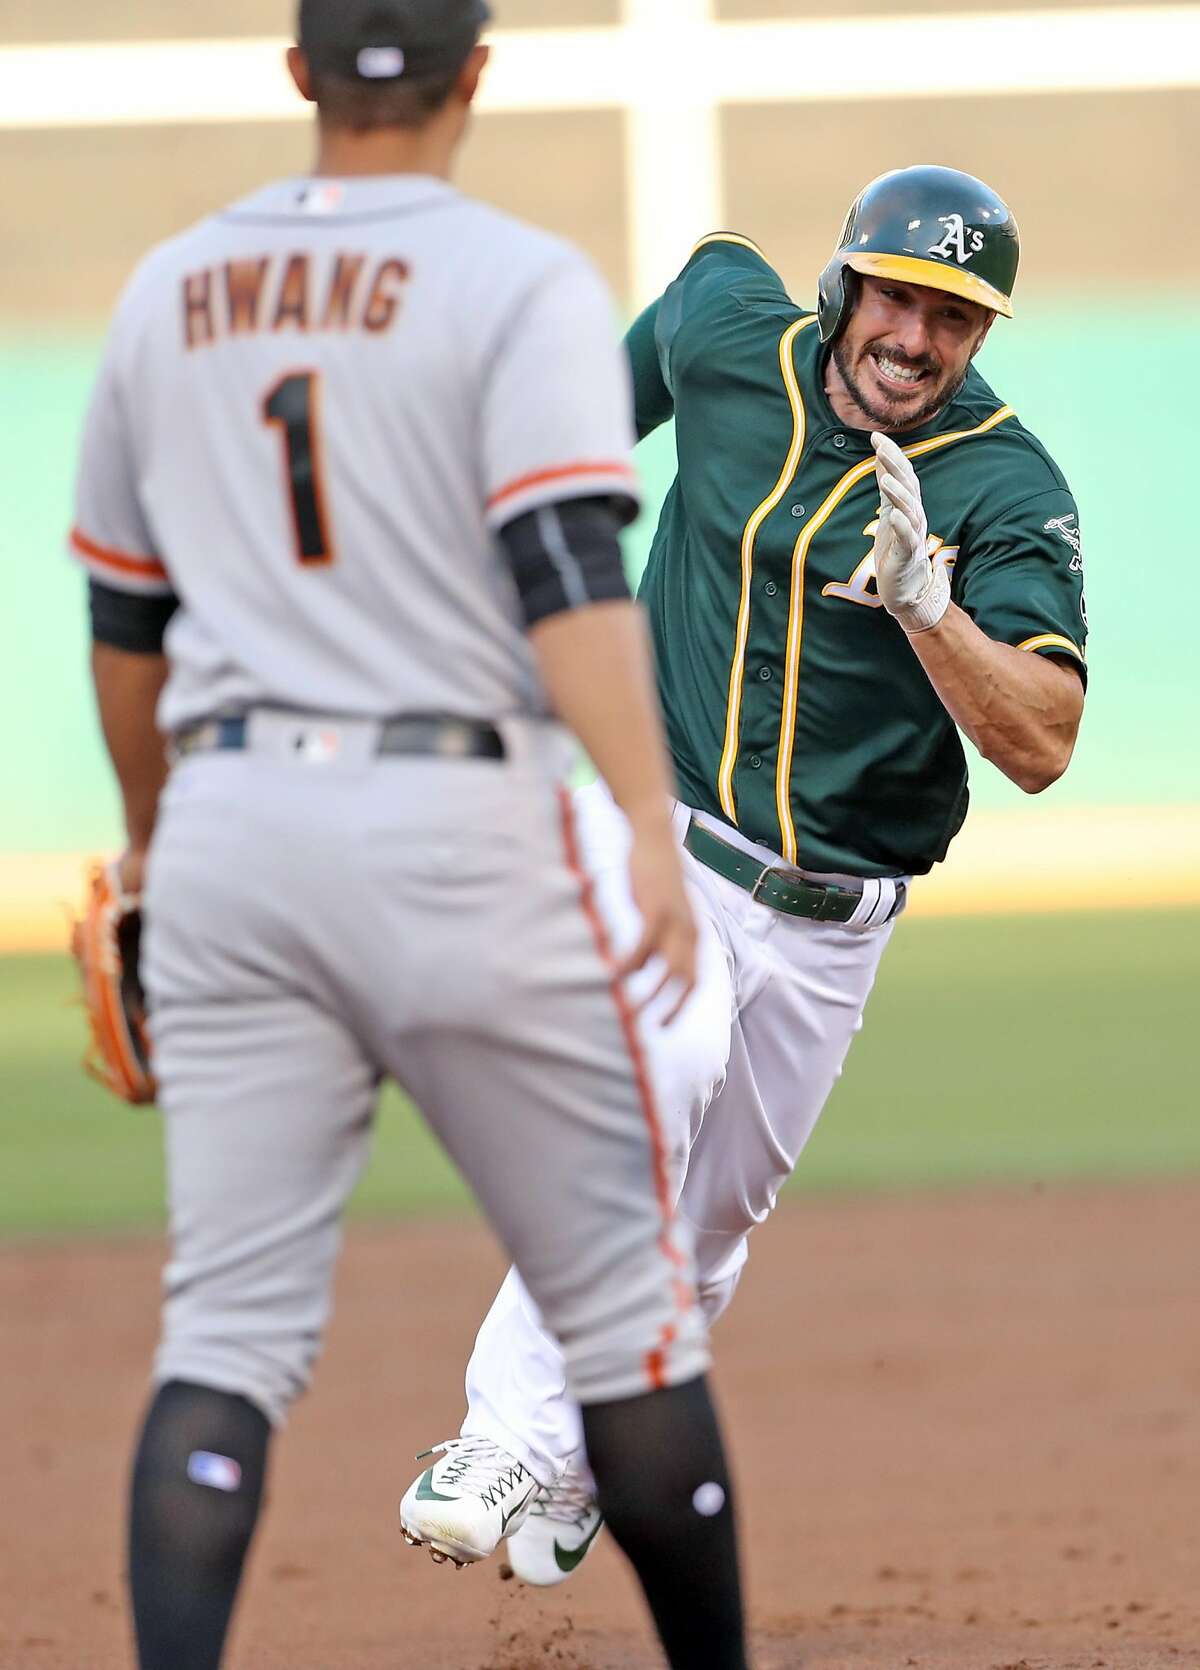 Oakland Athletics' Matt Joyce heads for third base while scoring on Jed Lowrie's RBI single in 1st inning against San Francisco Giants during MLB game at Oakland Coliseum in Oakland, Calif. on Monday, July 31, 2017.